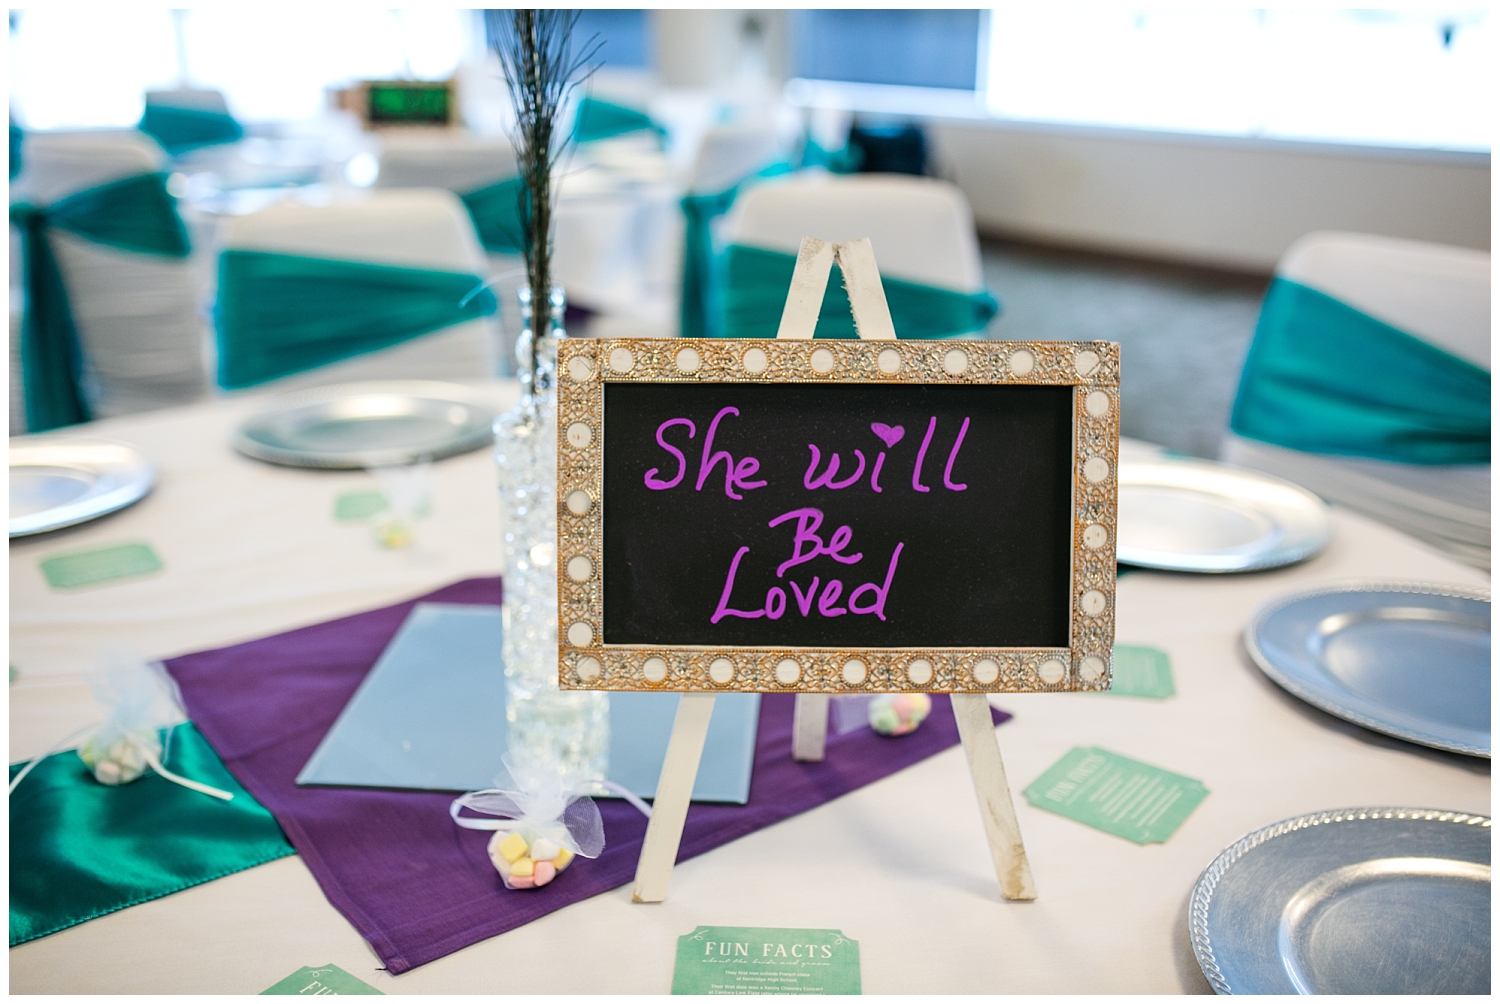 peacock theme wedding details at Kitsap Conference Center,